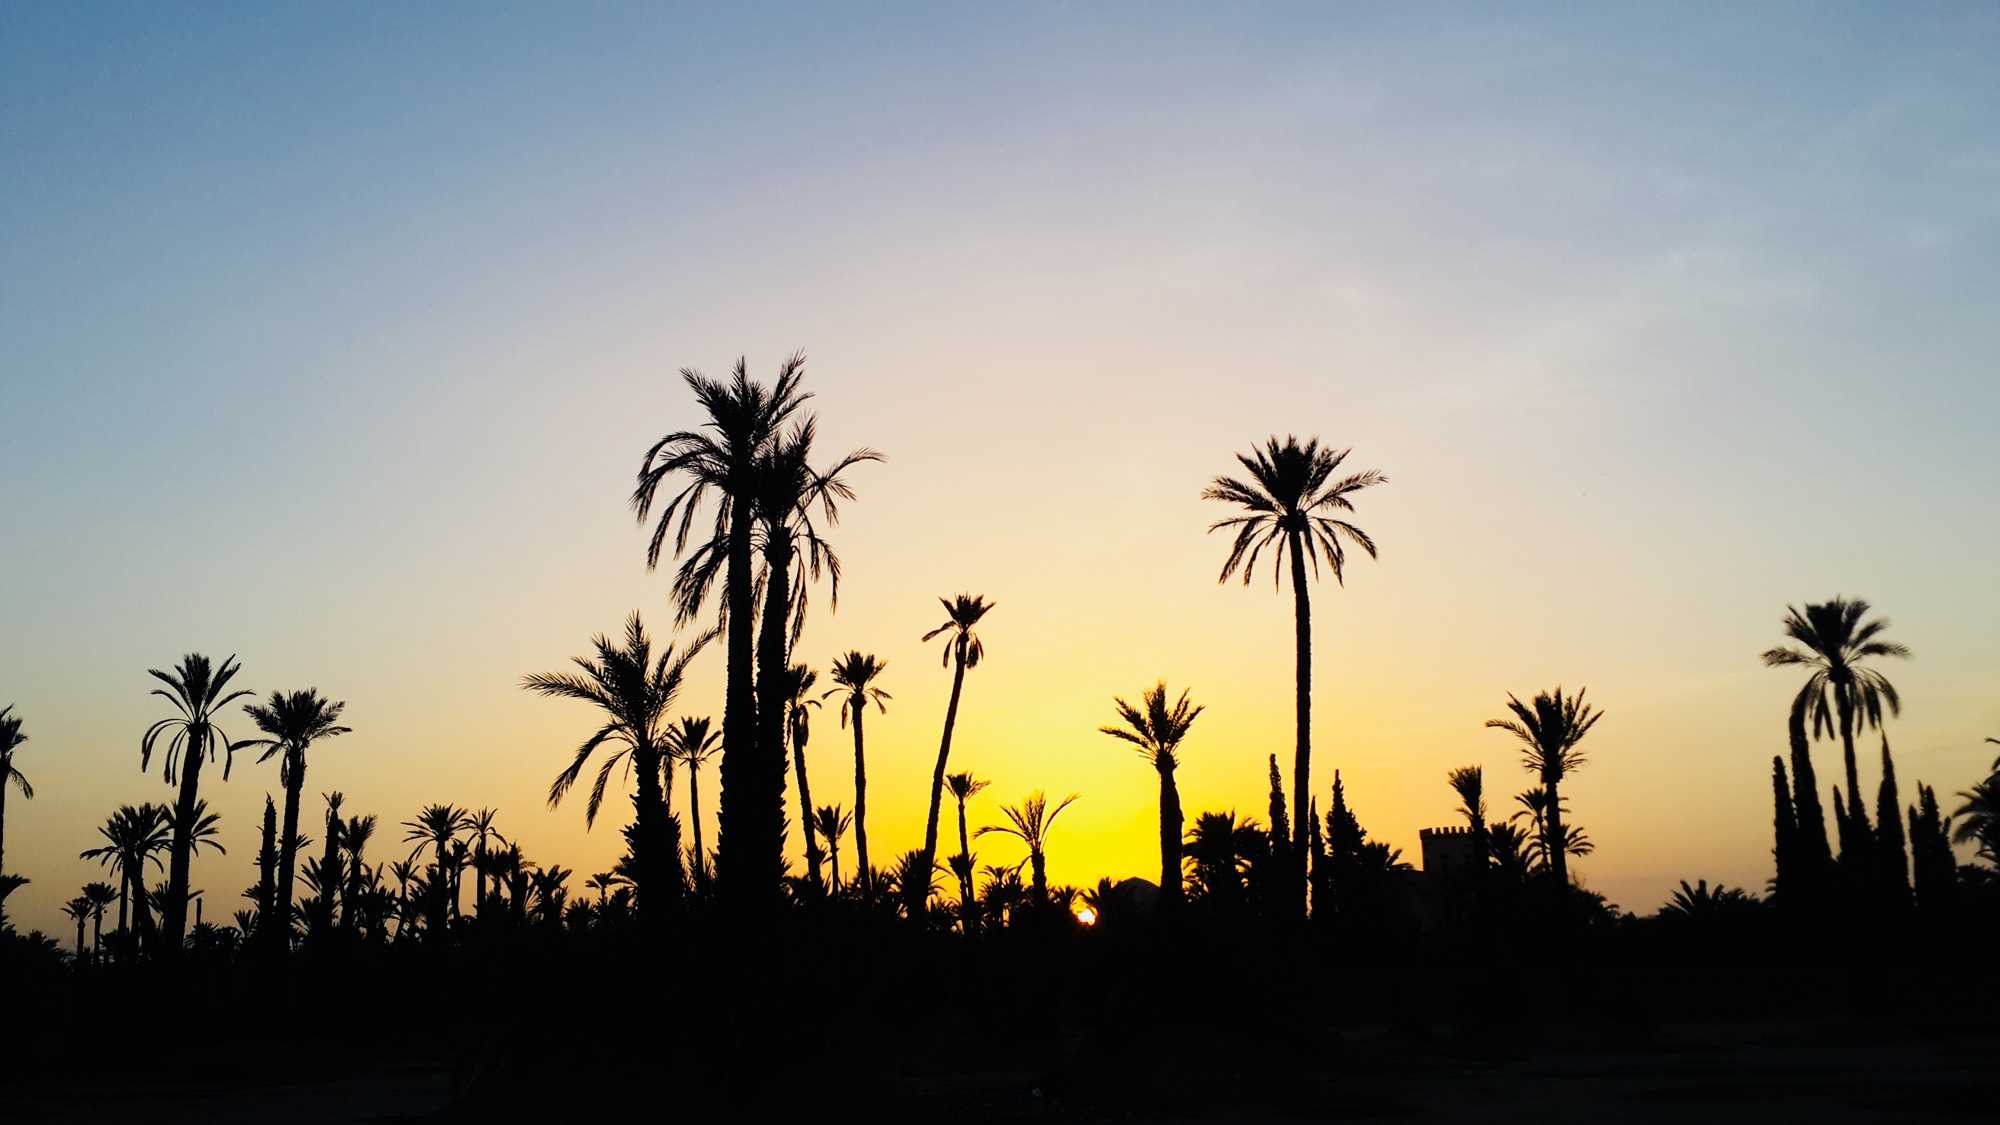 Sunset camel ride in the palm grove of  Marrakech